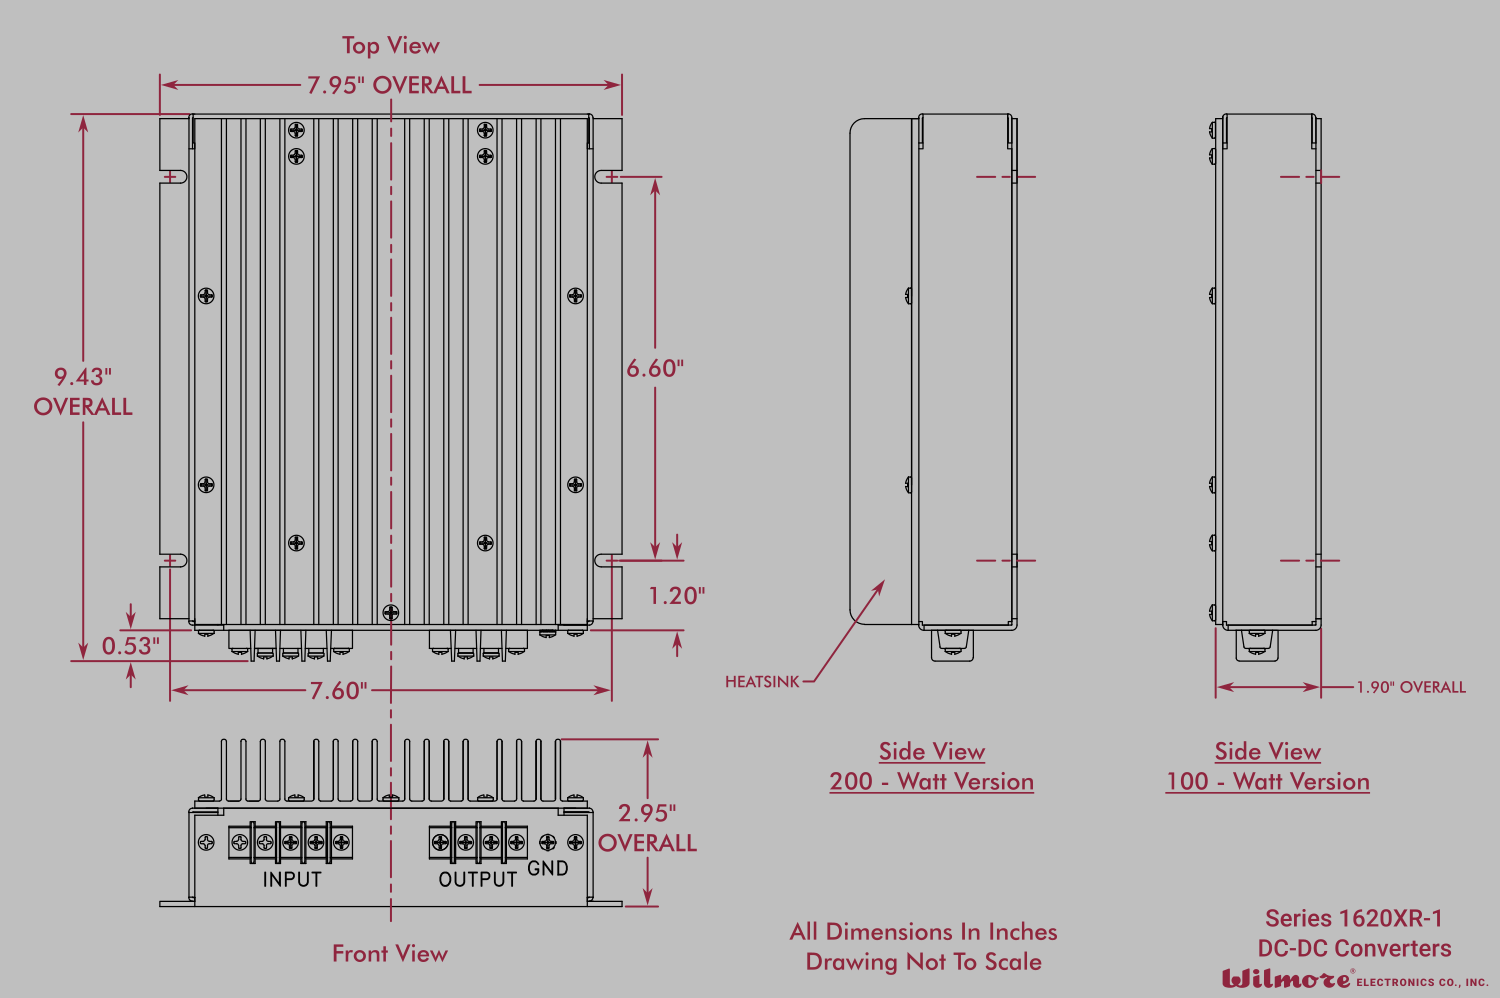 Series 1620XR-1 Product Dimensions